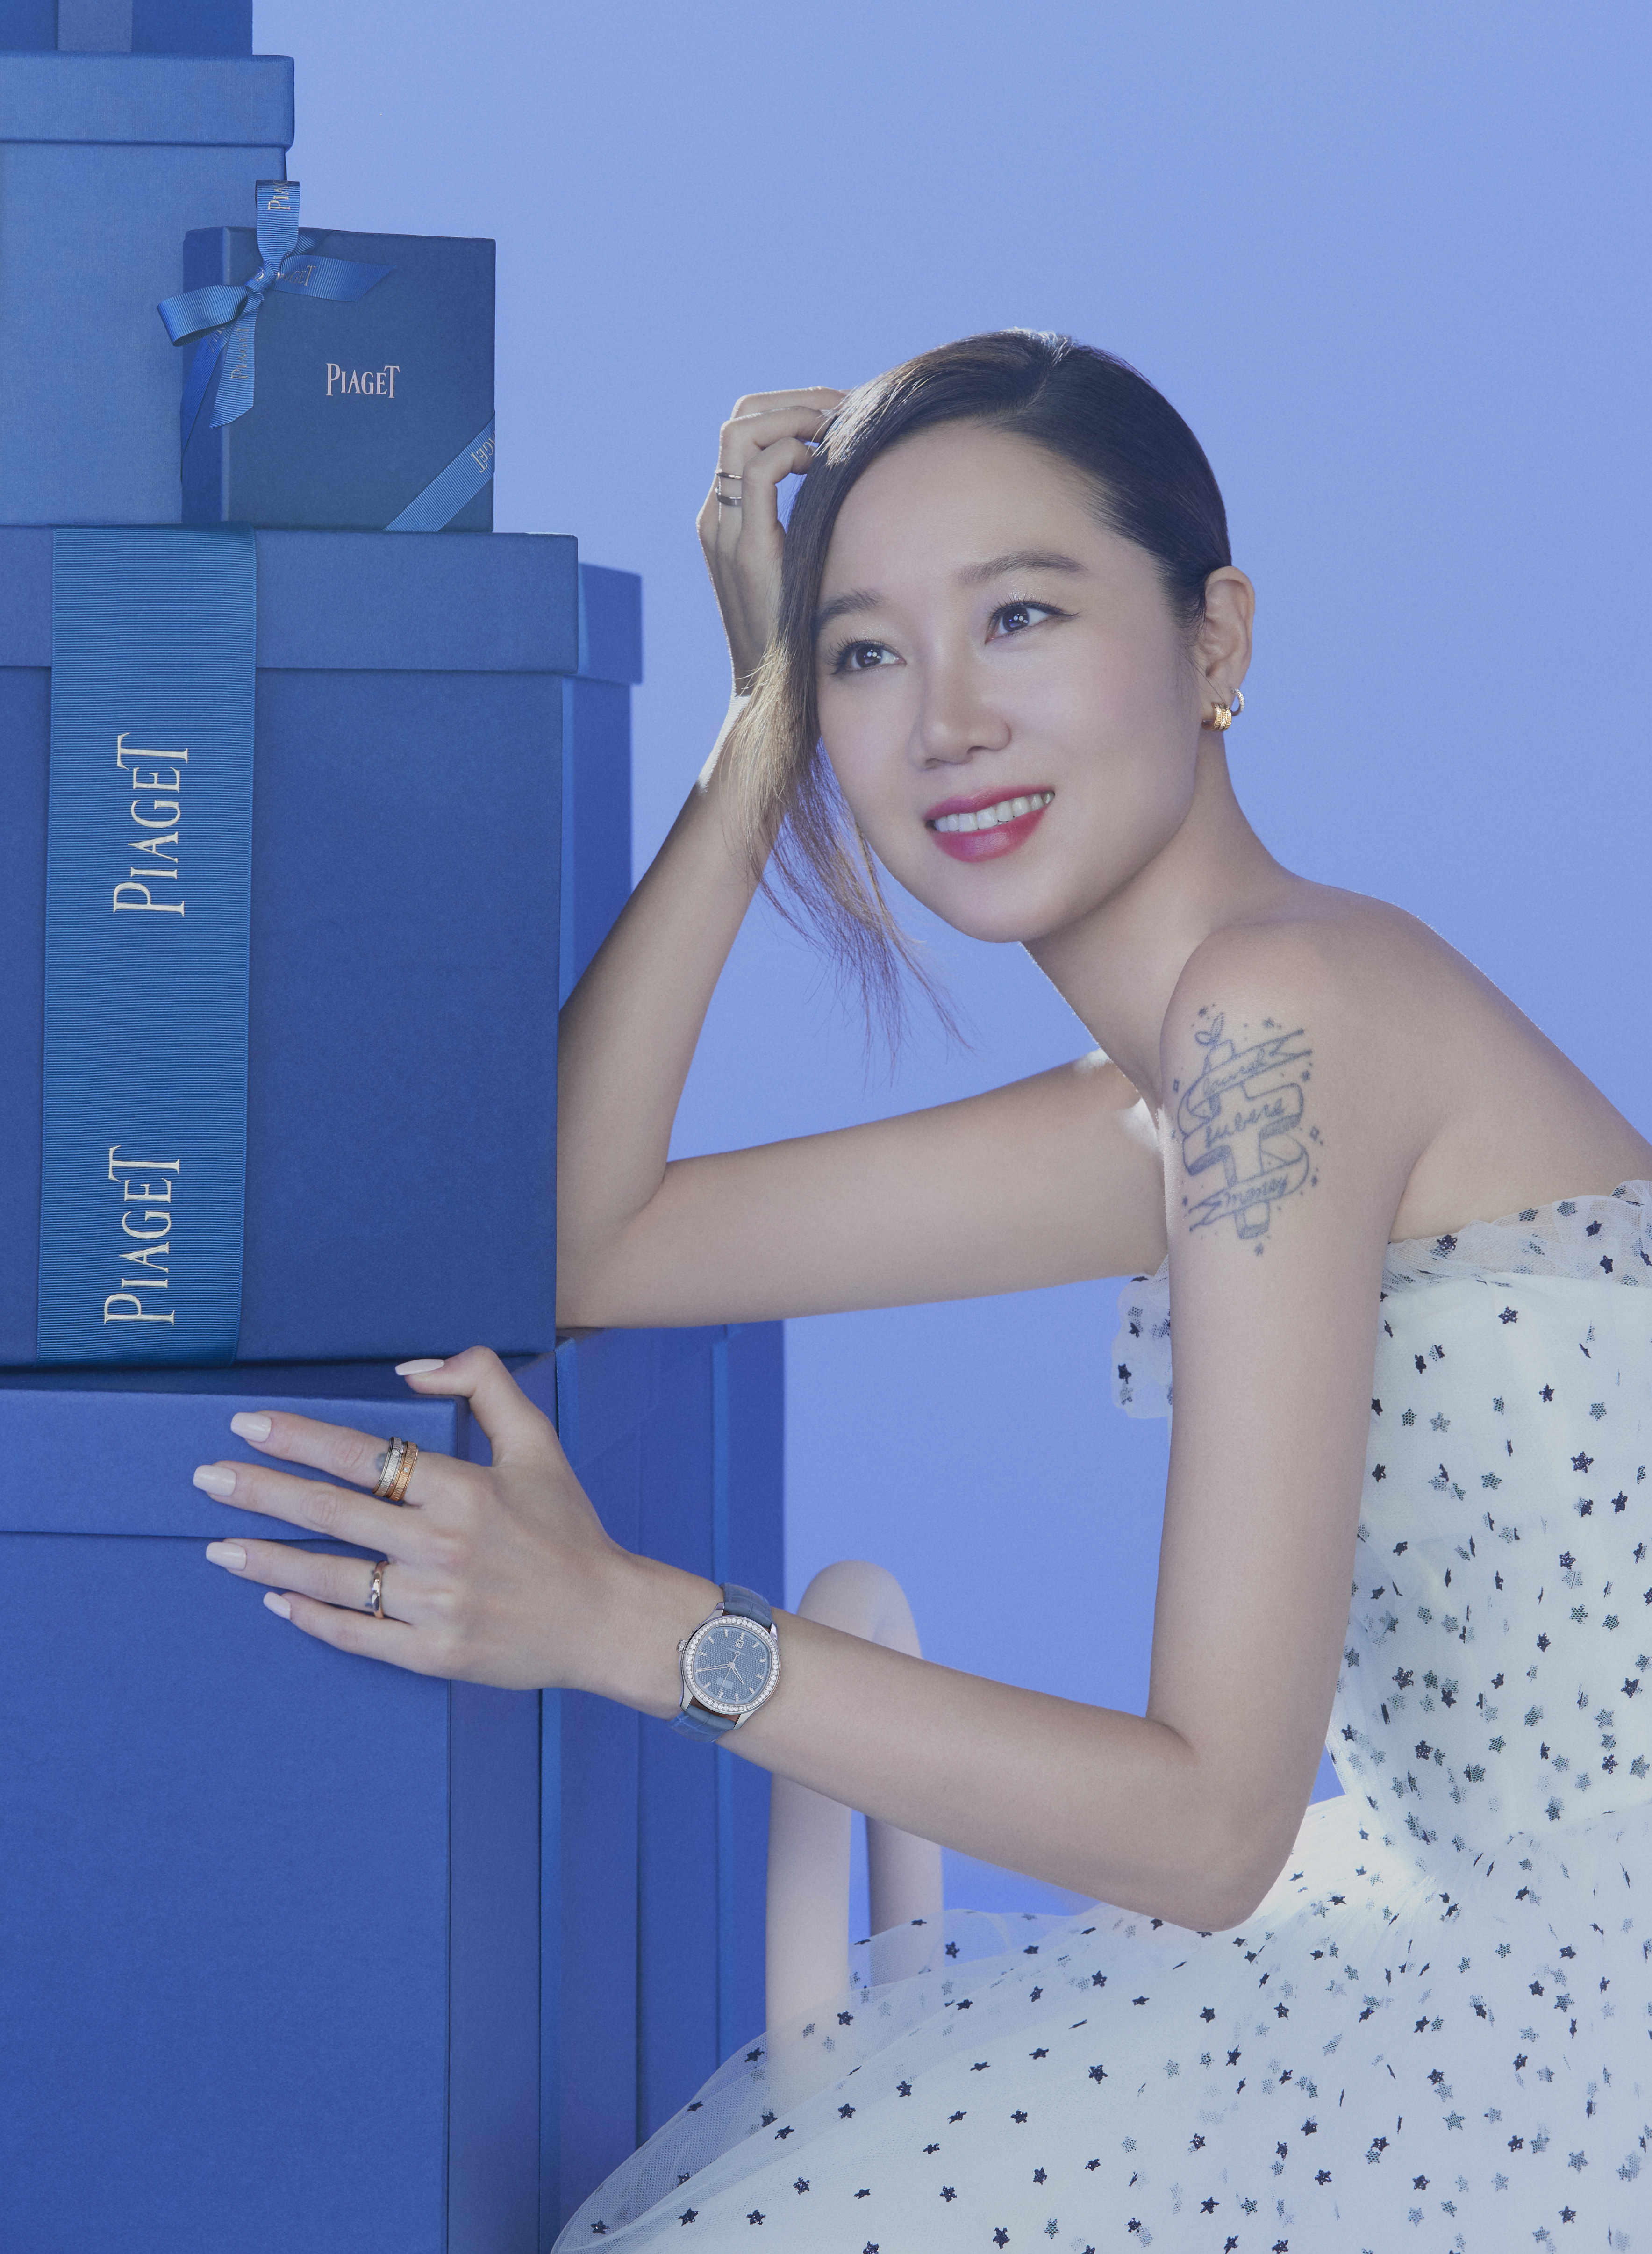 2. Piaget Valentines Day with Kong Hyo Jin 2